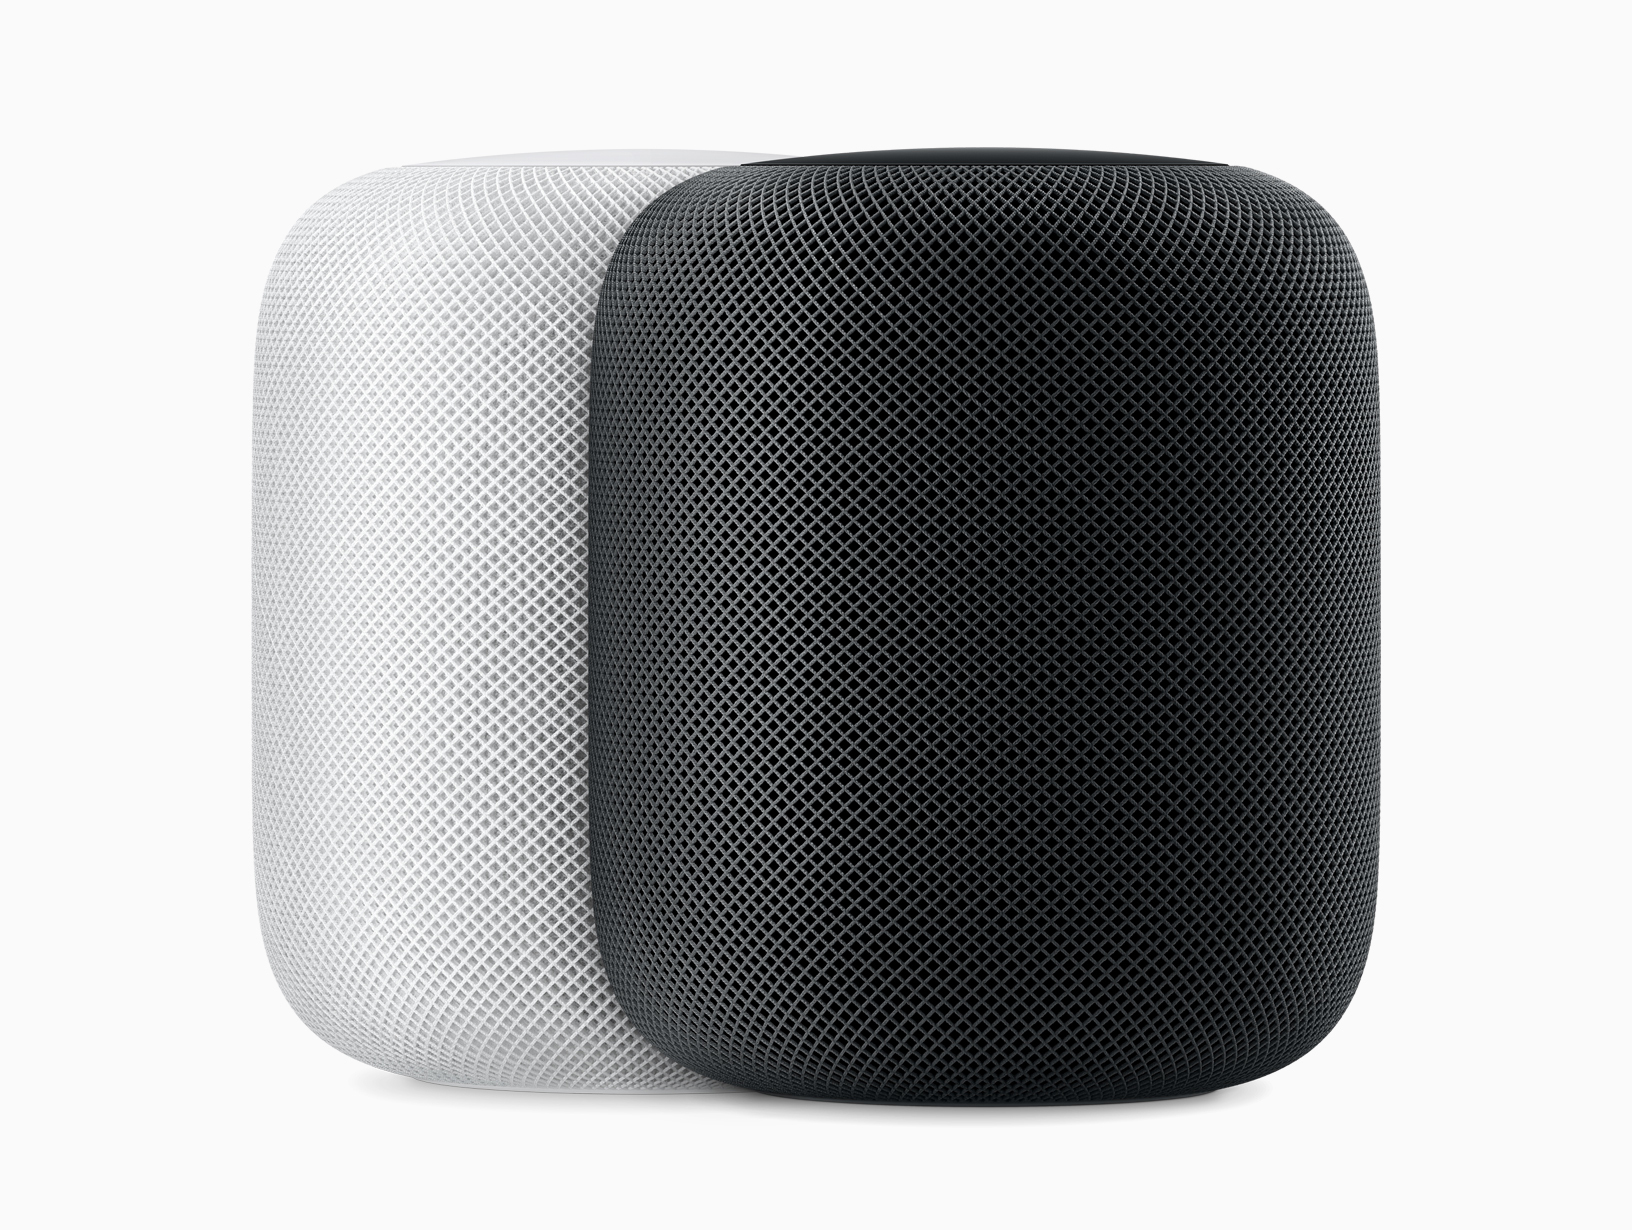 3) You can use a stereo pair of HomePods